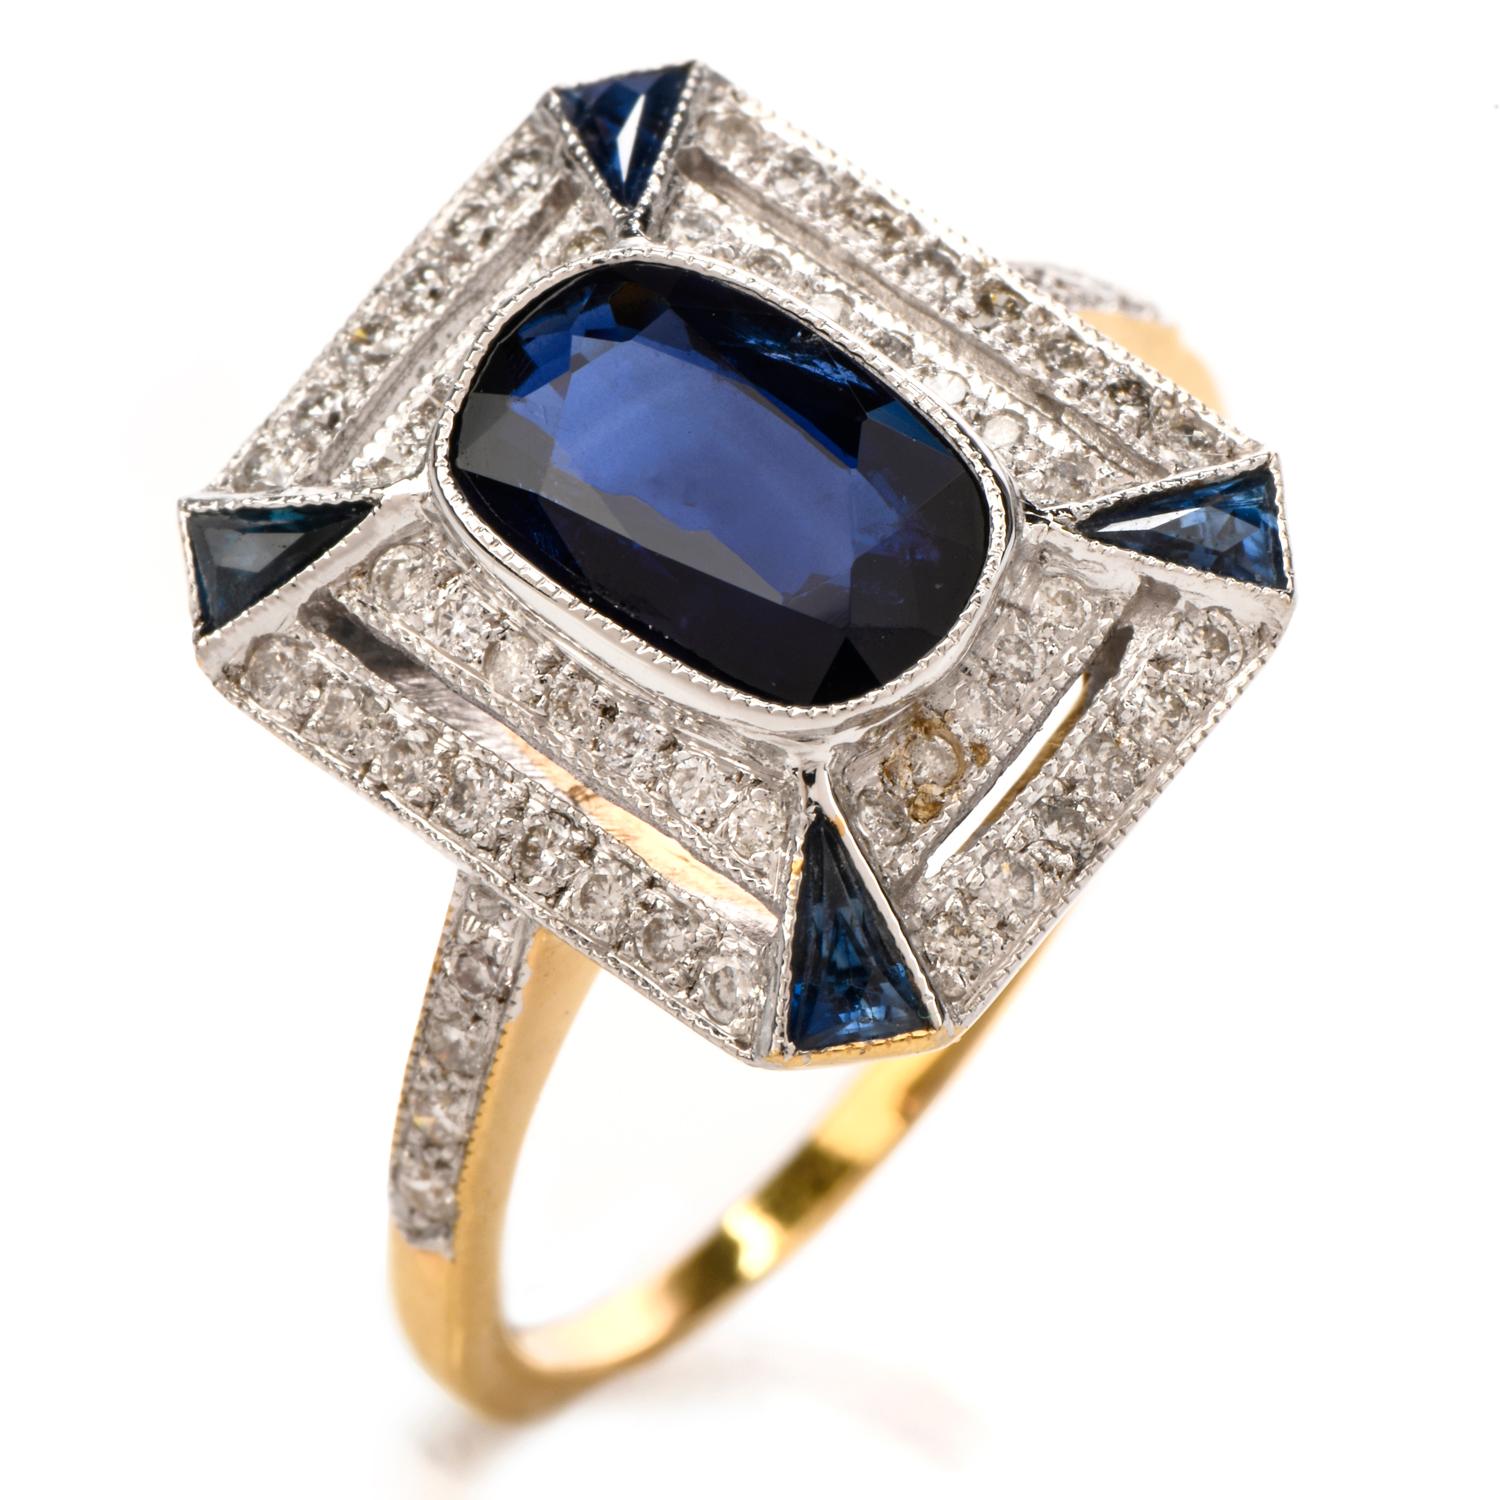 This elegant art deco design blue sapphire and diamond ring is crafted in solid 18-karat yellow gold and white gold top, weighing 4.3 grams and measuring 14mm x 6mm high. Featuring one centered bezel set, oval shaped blue sapphire and 4 bezel set,